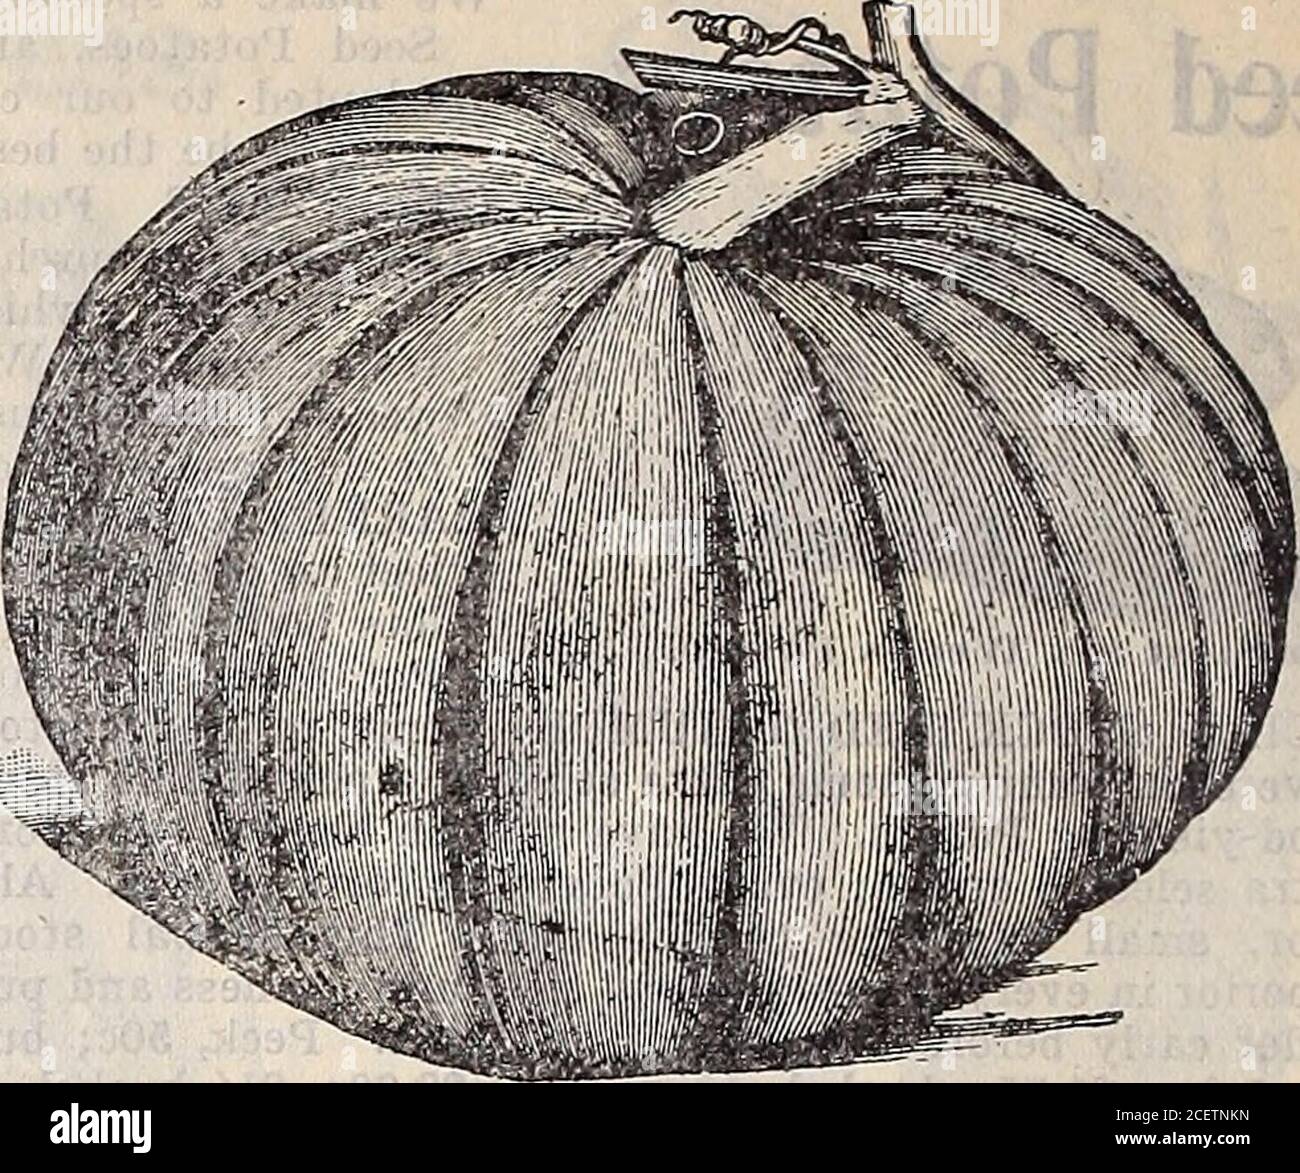 . 1906 annual catalogue / Otto Schwill & Co. 08 Pumpkins. Culture—One pound will plant 40 hills; 5 pounds will plant anacre. Plant in hills 8 or 10 feet apart each way, allowing4 seeds to a hill. In other respects they are cultivated asMelons and Cucumbers. Mammoth Red Etampes—A strain of Cheese Pumpkin, withflesh fully twice as thick; orange color; fine grained; sweet.Packet, 4c; 1 oz., 8c; 2 oz., 15c; % lb., 25c; 1 lb., 75c. Post-age paid. Tennessee Sweet Potato—Pear-shaped; medium size; flesh andskin creamy white; fine grained; sweet and delicious.Packet, 4c; 1 oz., 8c; 2 oz., 12c; % lb., 2 Stock Photo